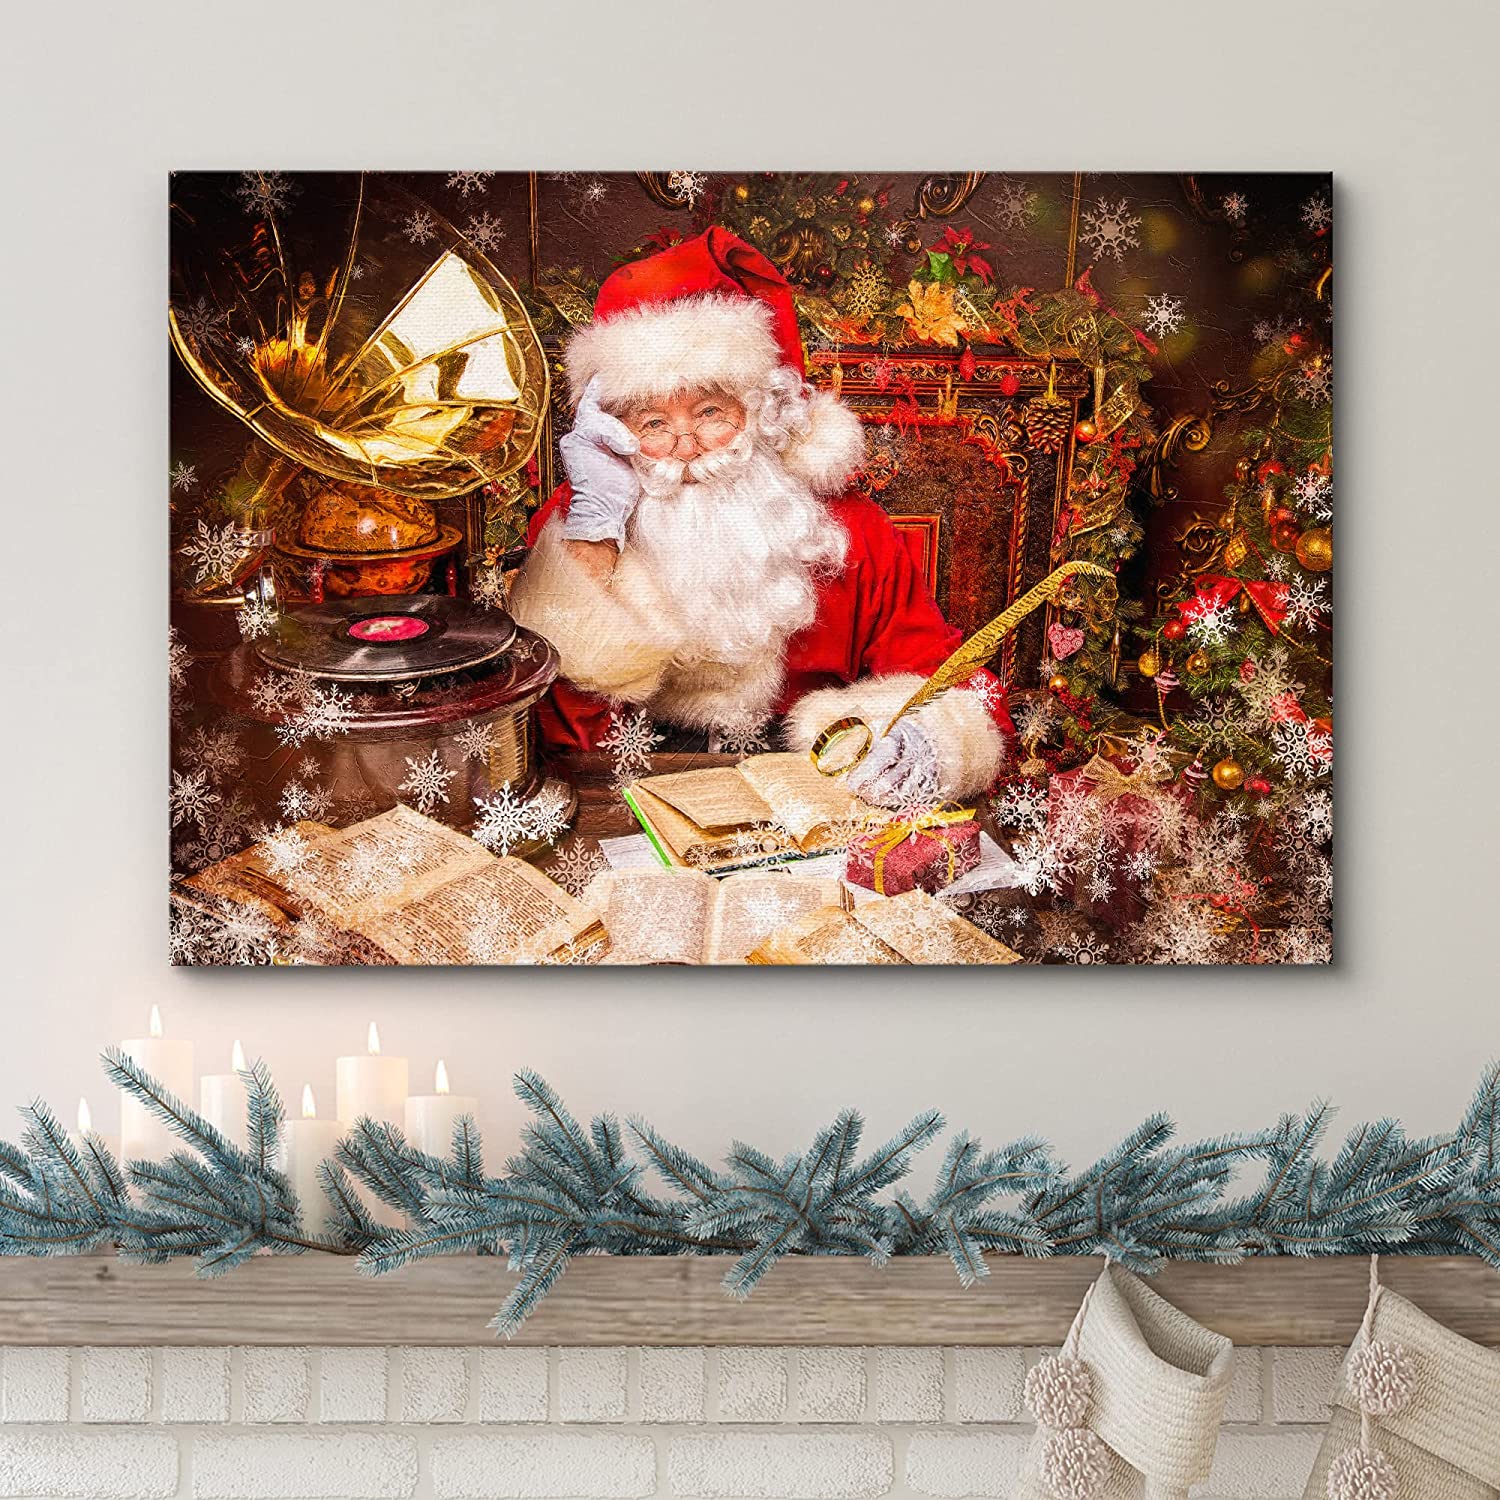 wall26 Canvas Print Wall Art Christmas Santa Claus Writing List  Celebrations  Holidays Decorative Illustrations Modern Art Scenic  Multicolor Warm for Living Room, Bedroom, Office 32